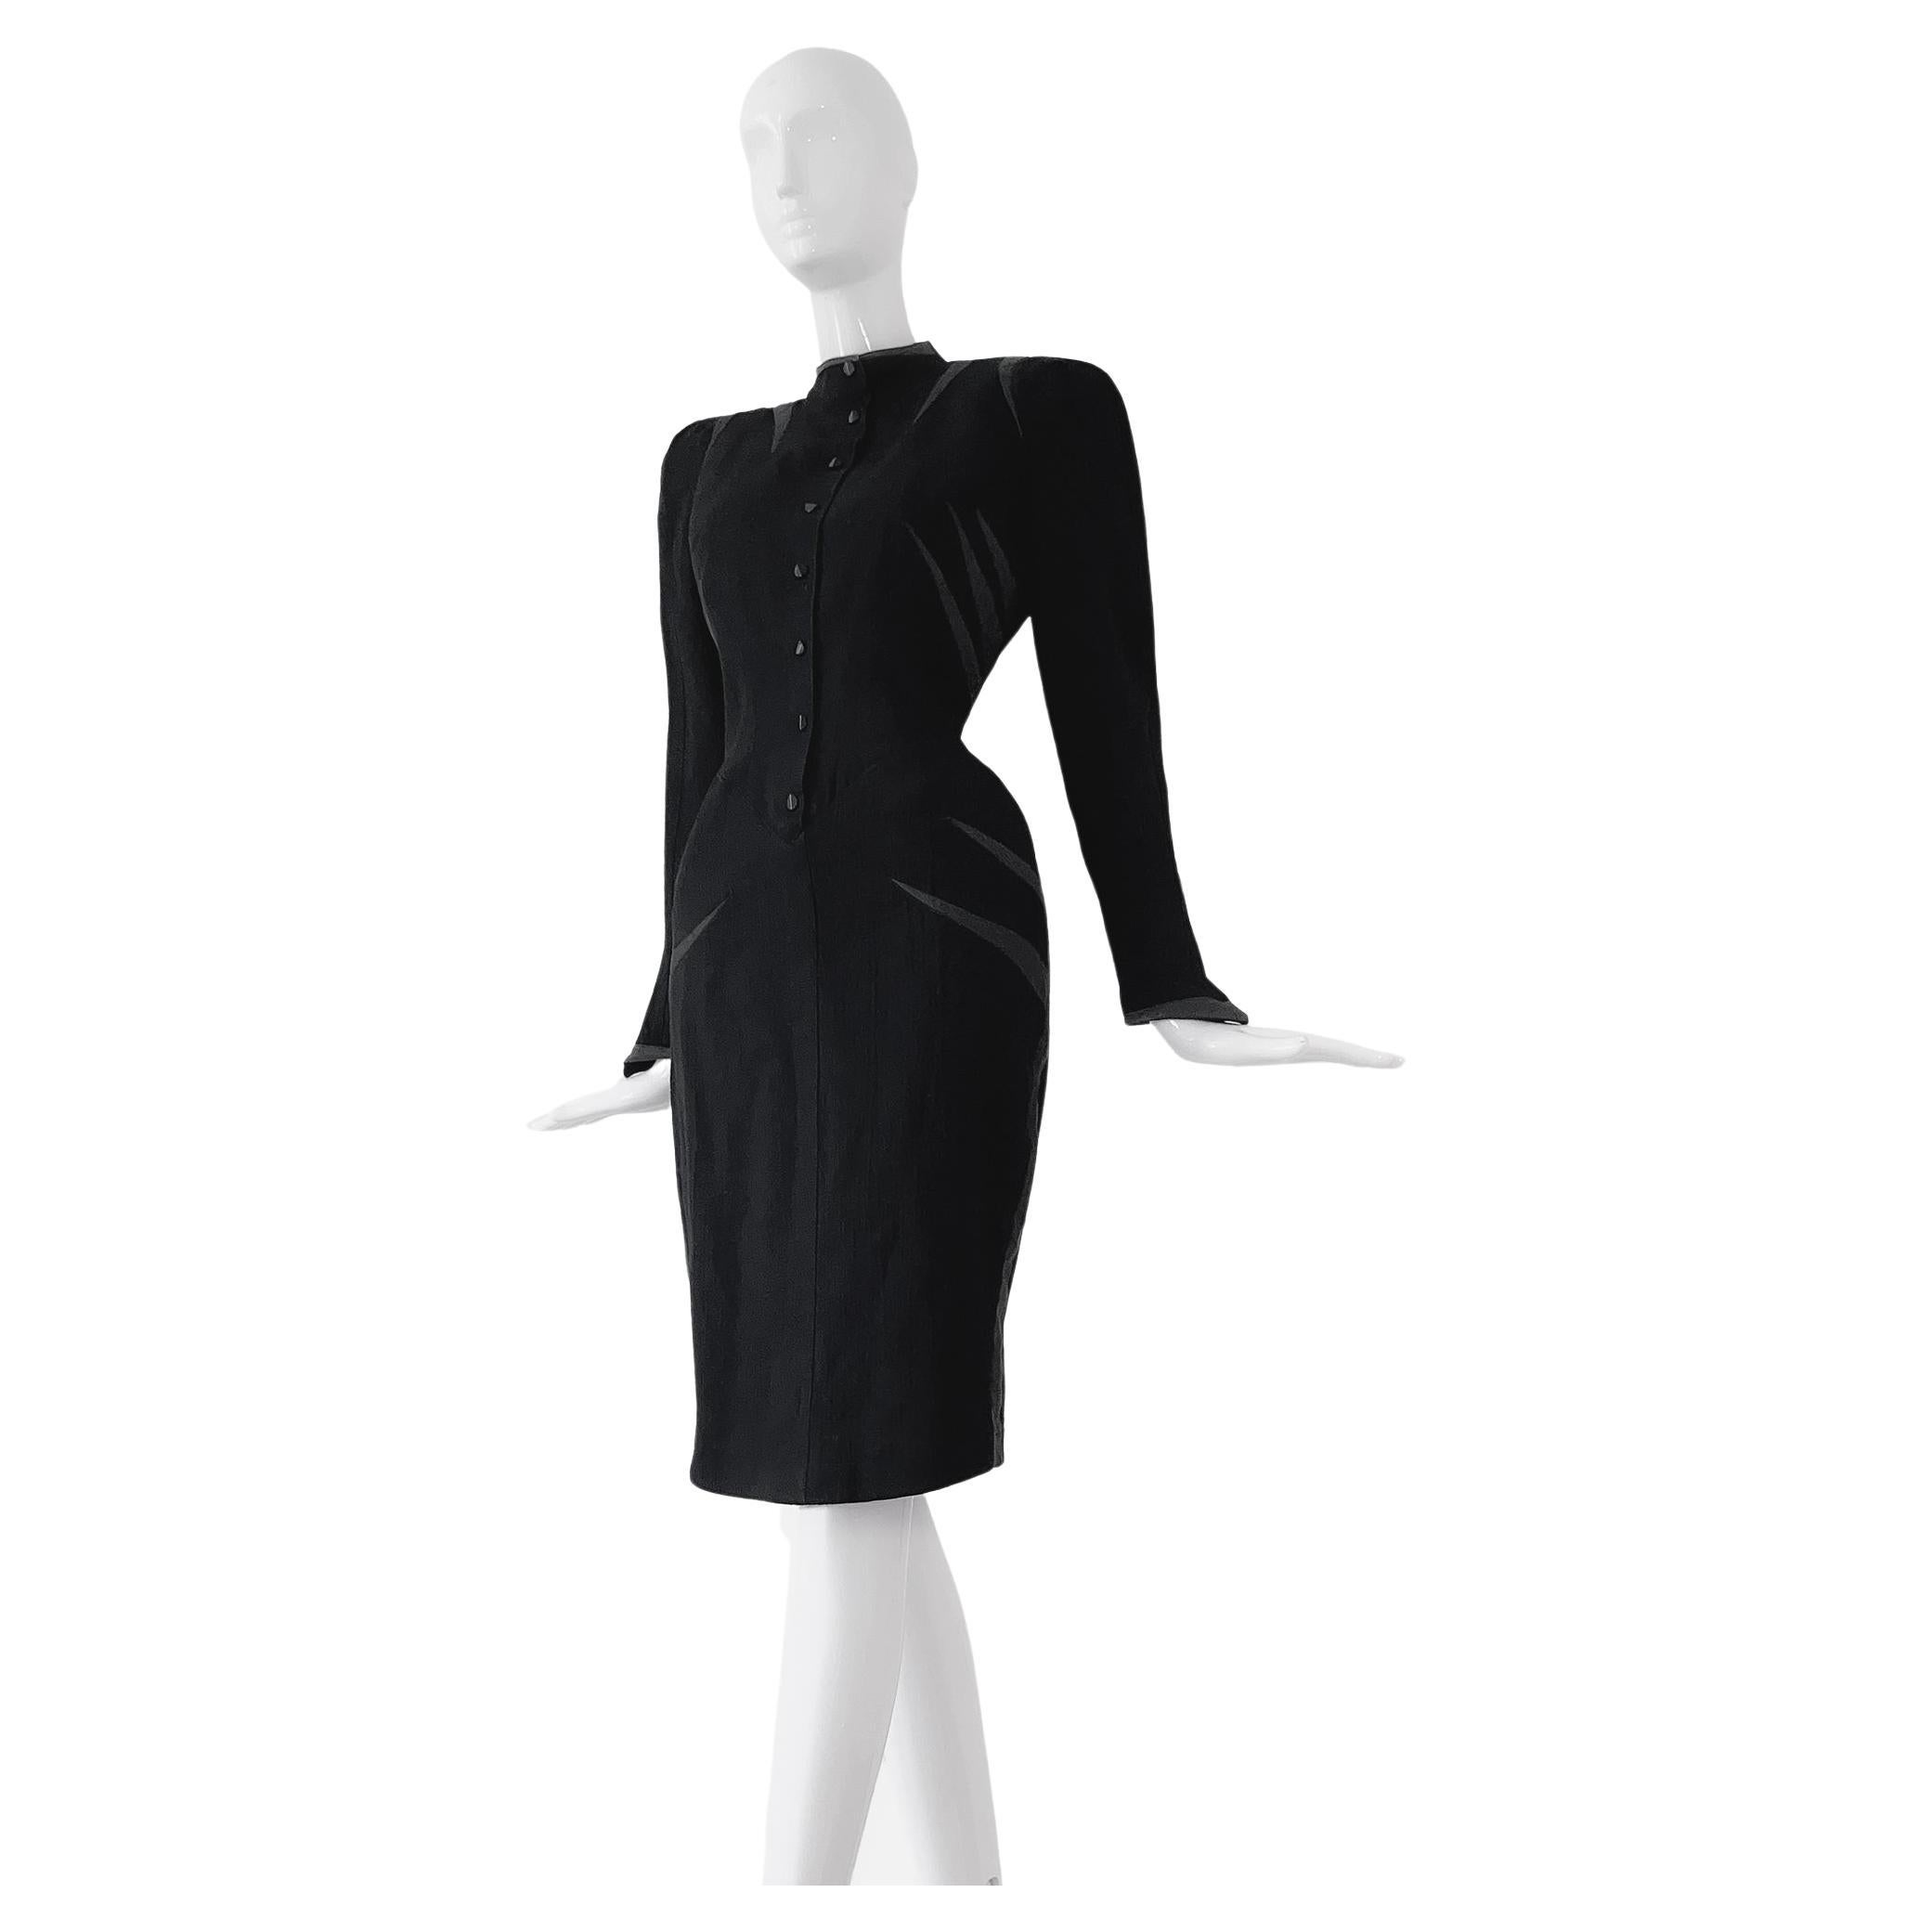 Rare Thierry Mugler SS 1988 Dress Black Iconic Dramatic Collectors Piece 